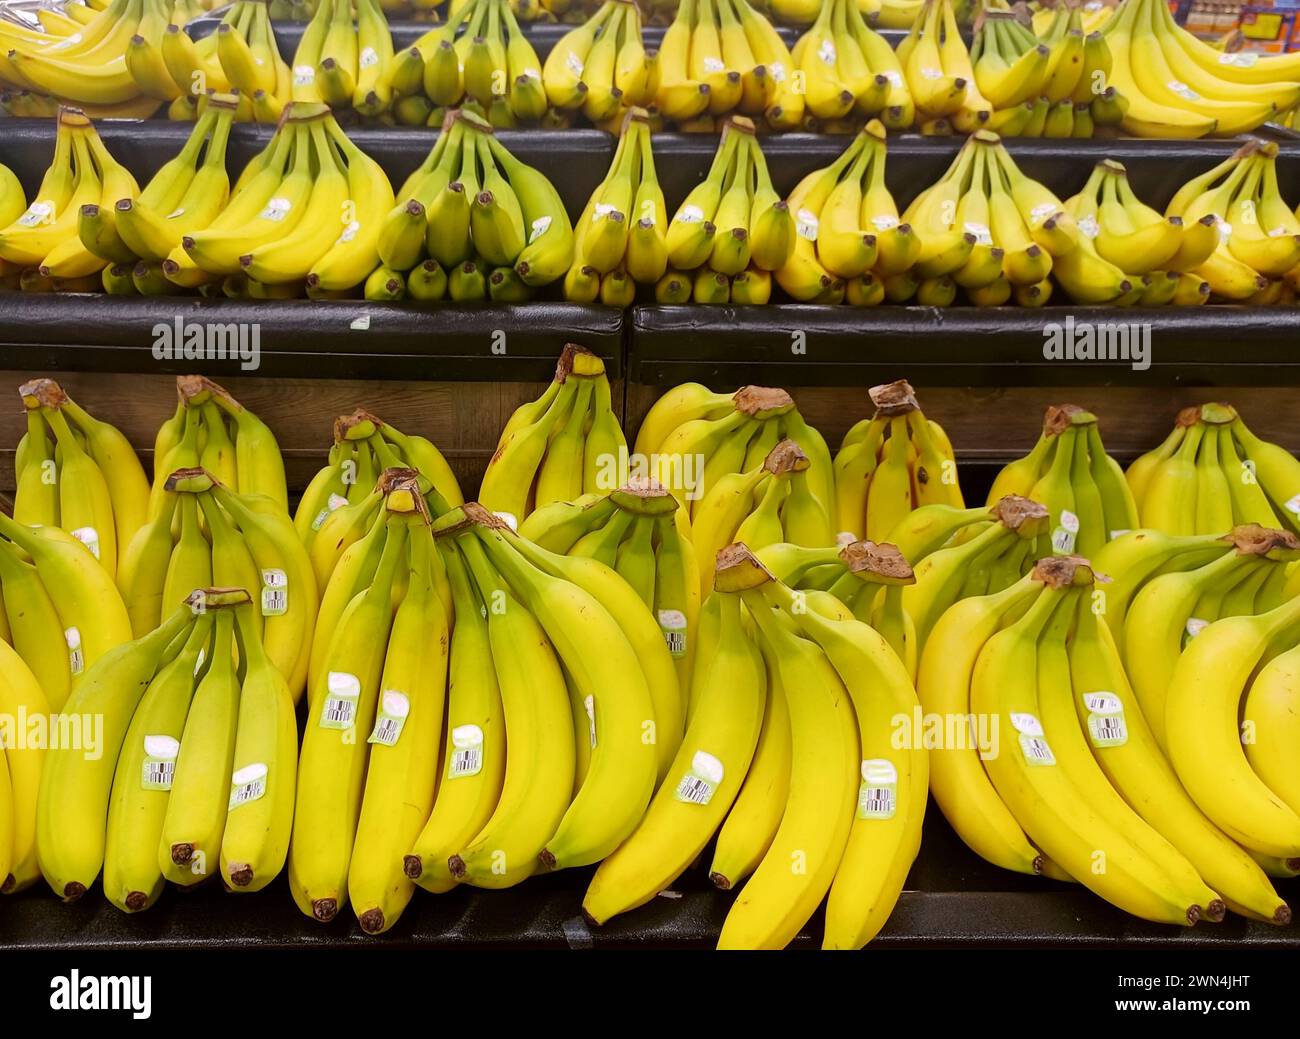 Banana bunches displayed on a supermarket shelf in the produce aisle. Stock Photo